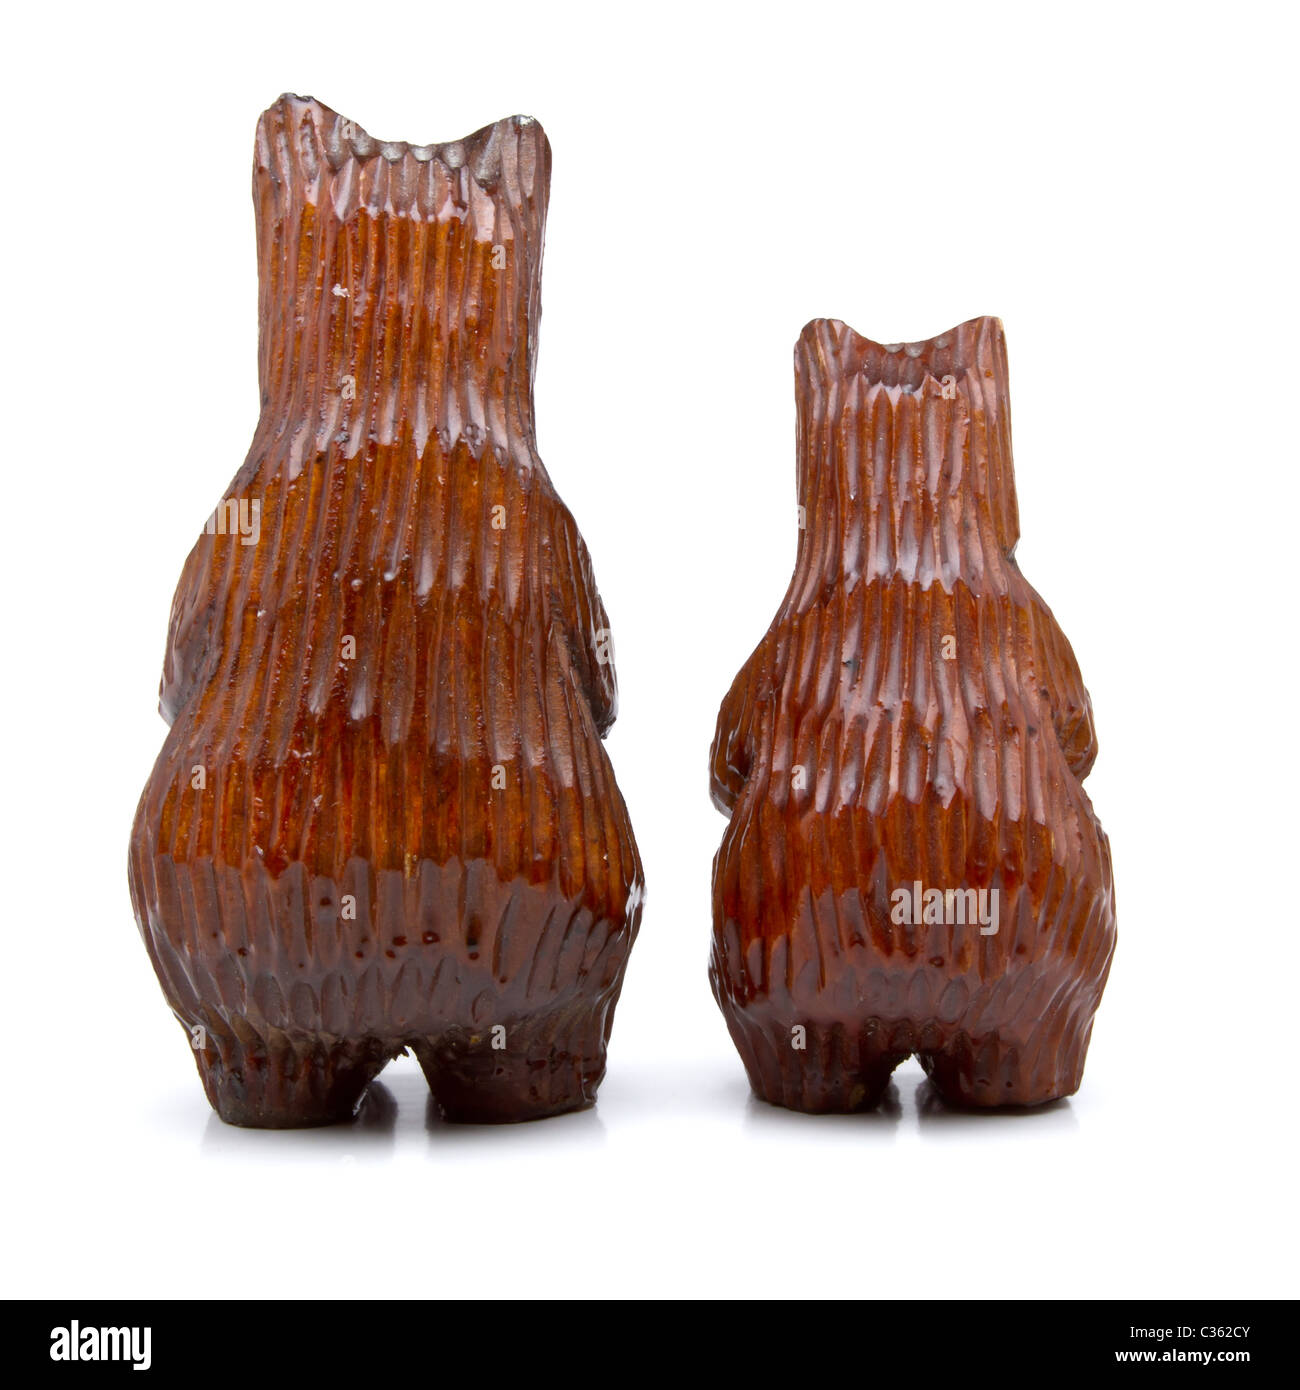 Pair of German black forest carved wooden bears. Stock Photo